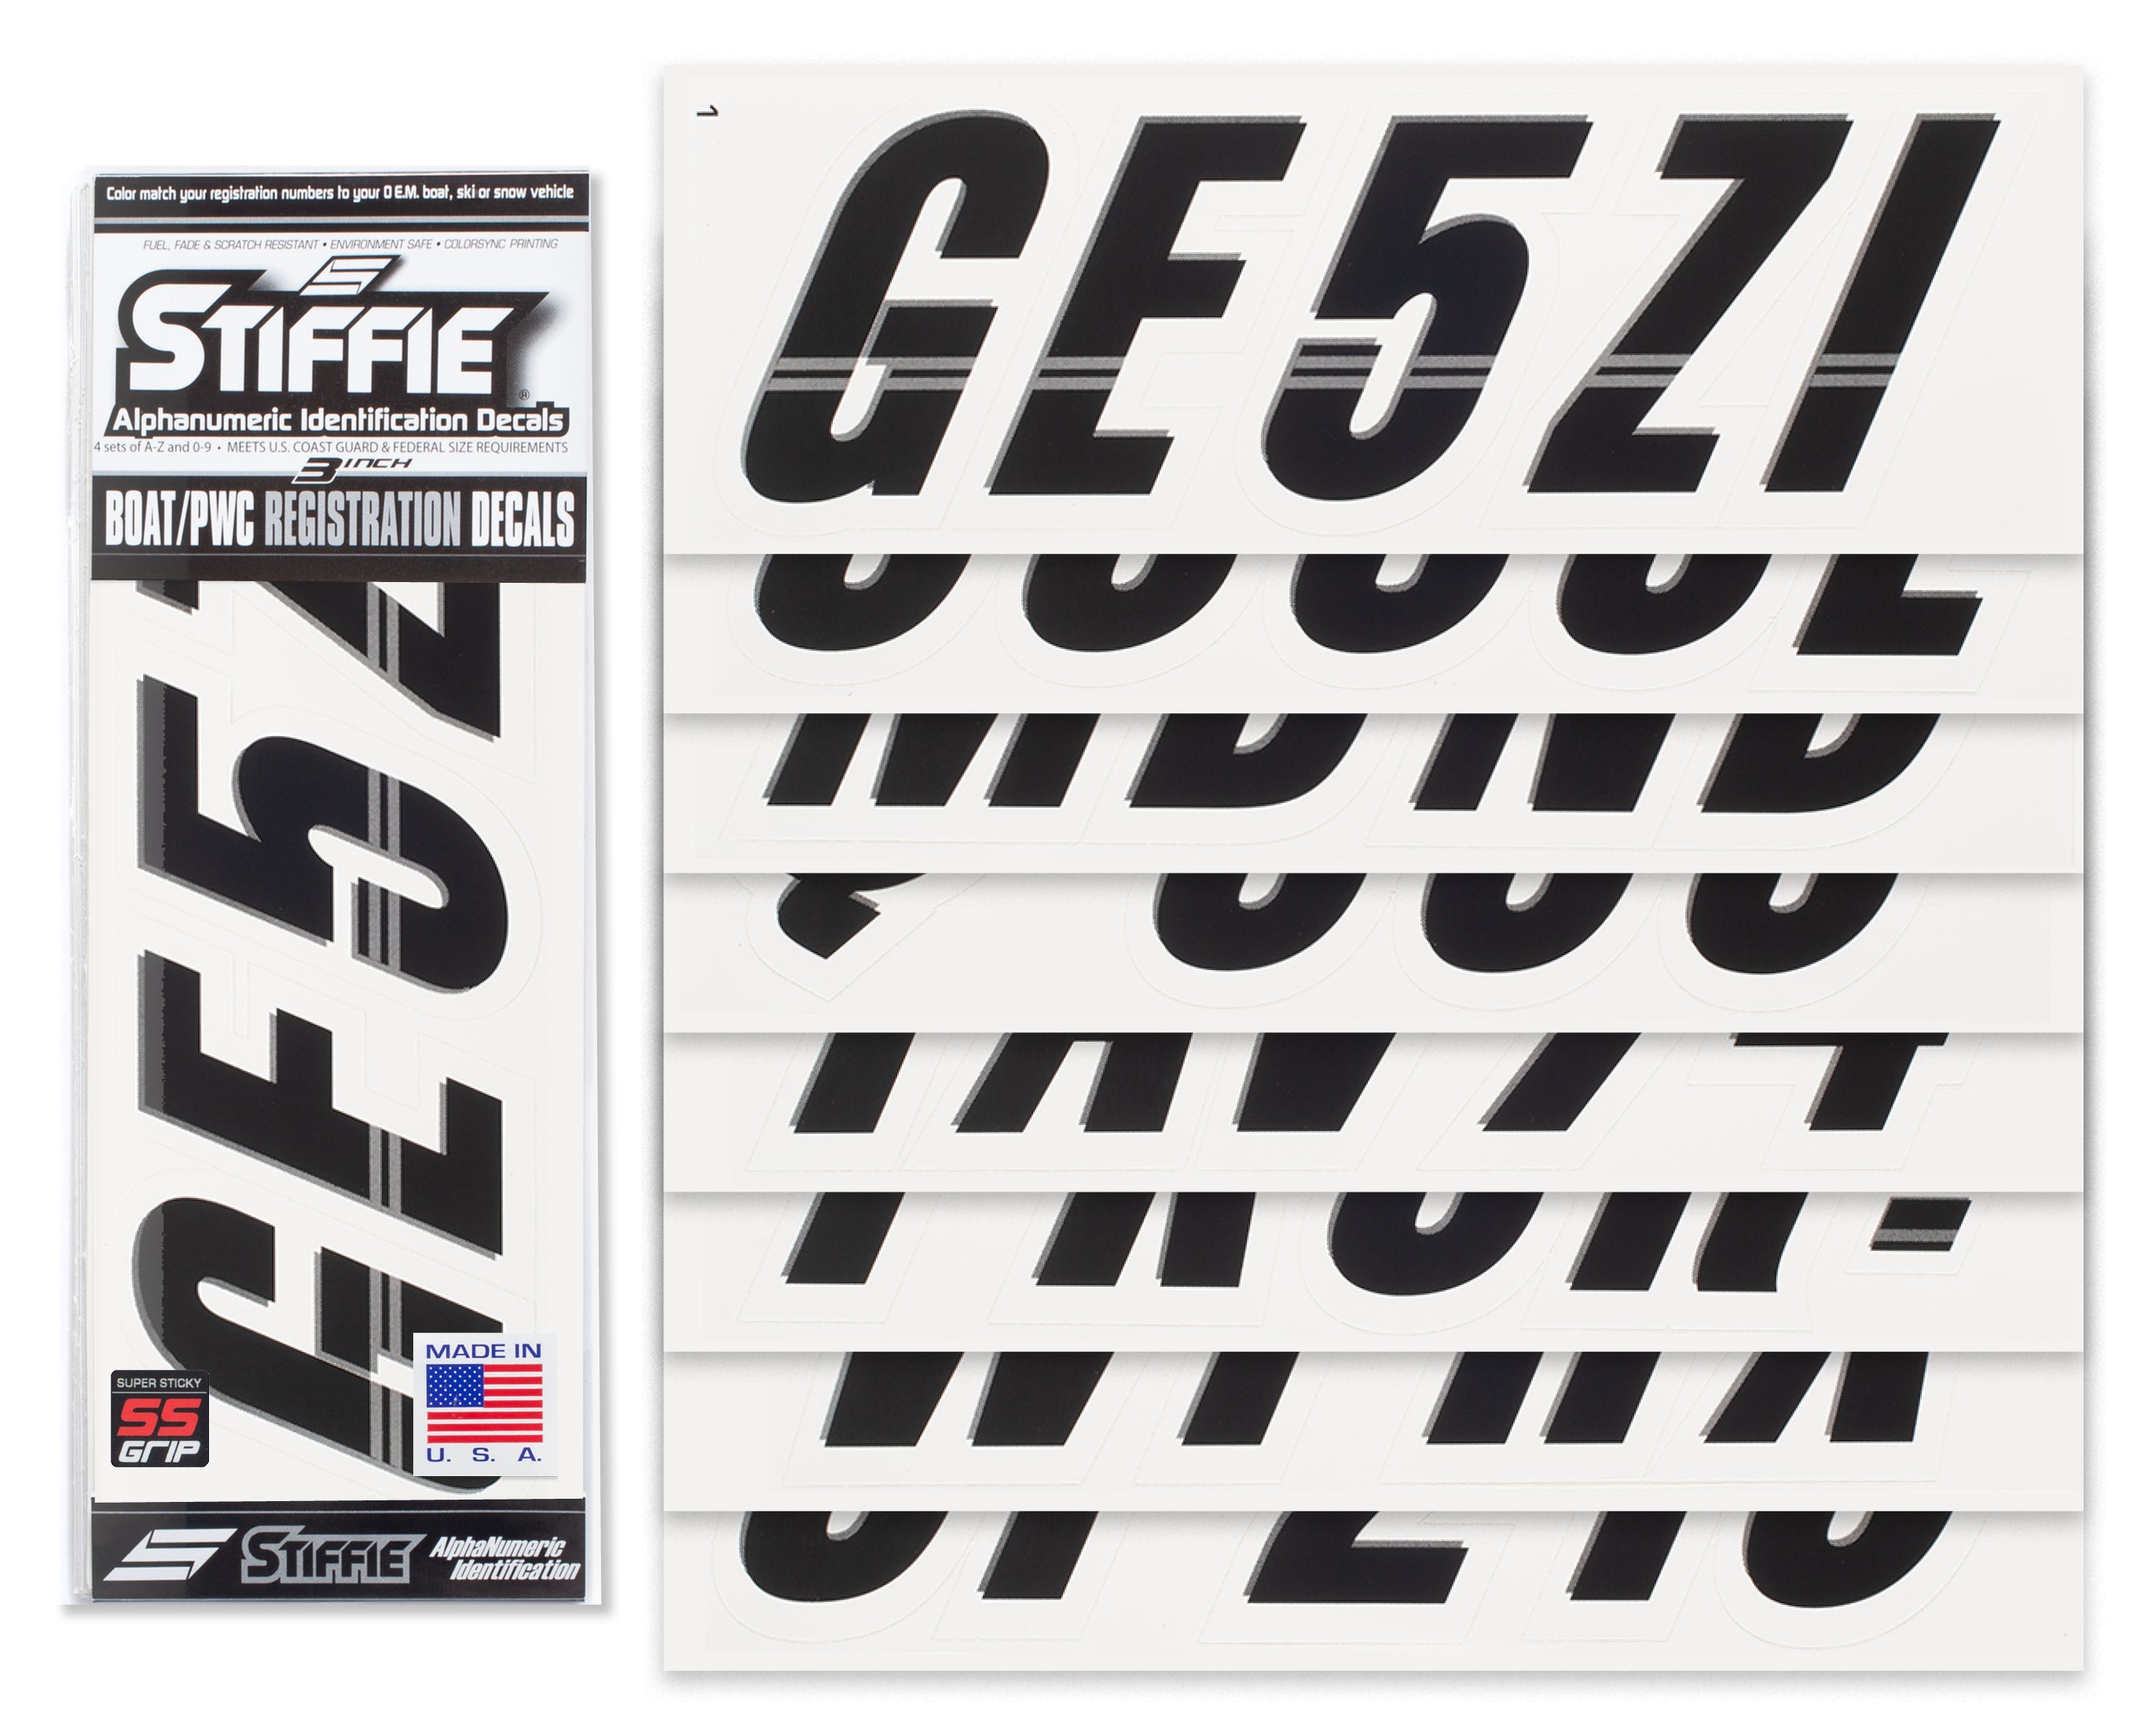 Techtron Black/White Super Sticky 3" Alpha Numeric Registration Identification Numbers Stickers Decals for Sea-Doo Spark, Inflatable Boats, Ribs, Hypalon/PVC, PWC and Boats.